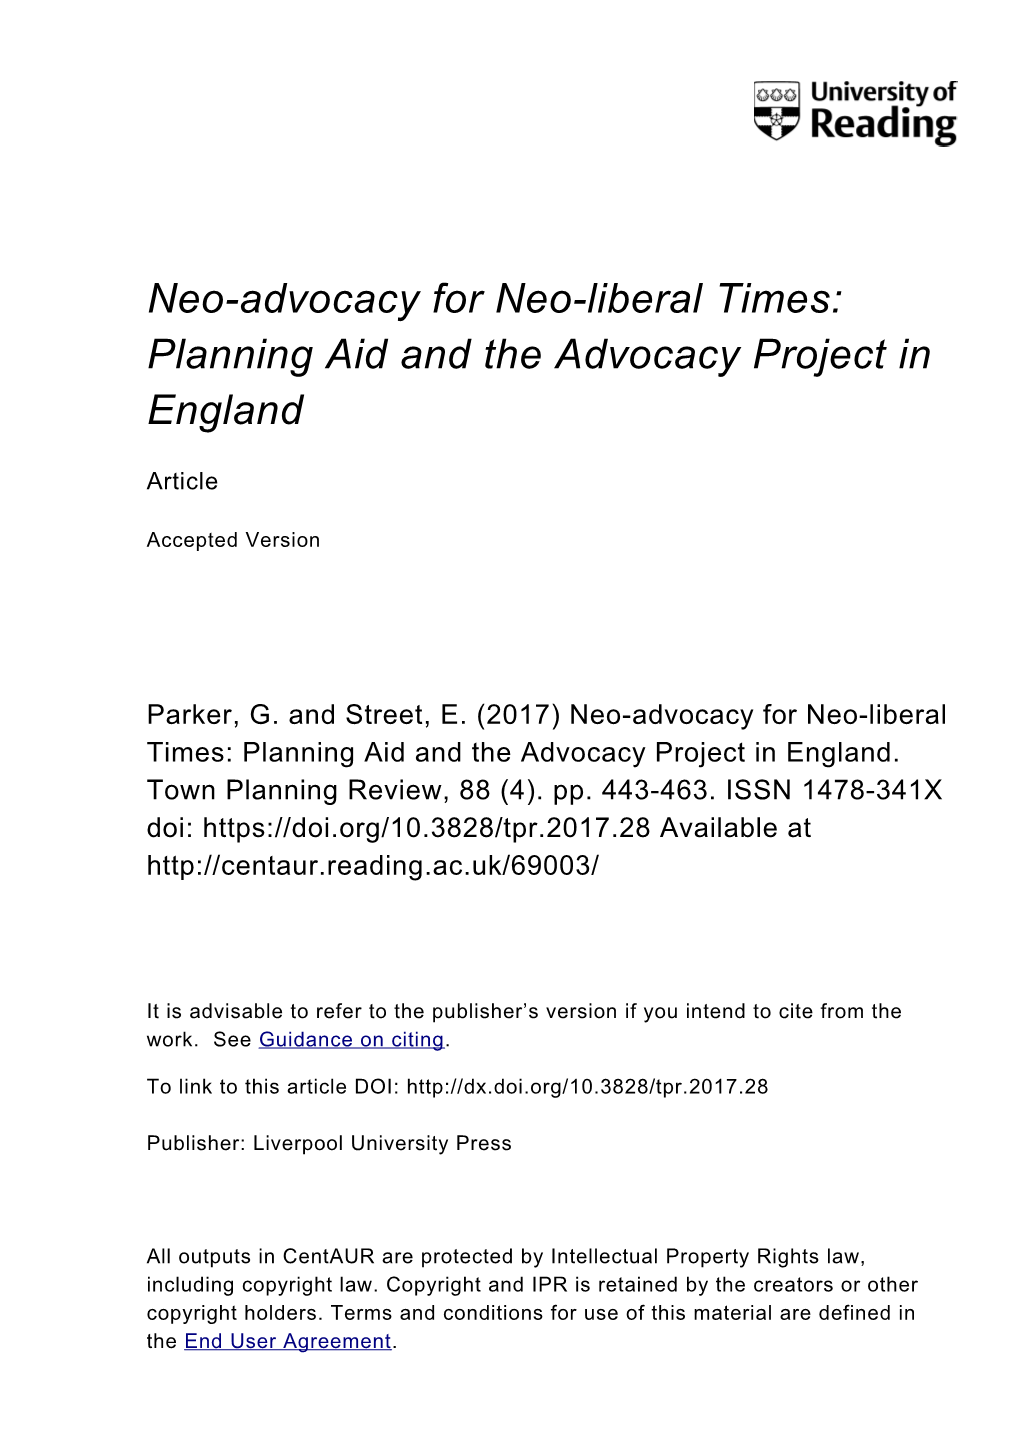 Neo-Advocacy for Neo-Liberal Times: Planning Aid and the Advocacy Project in England